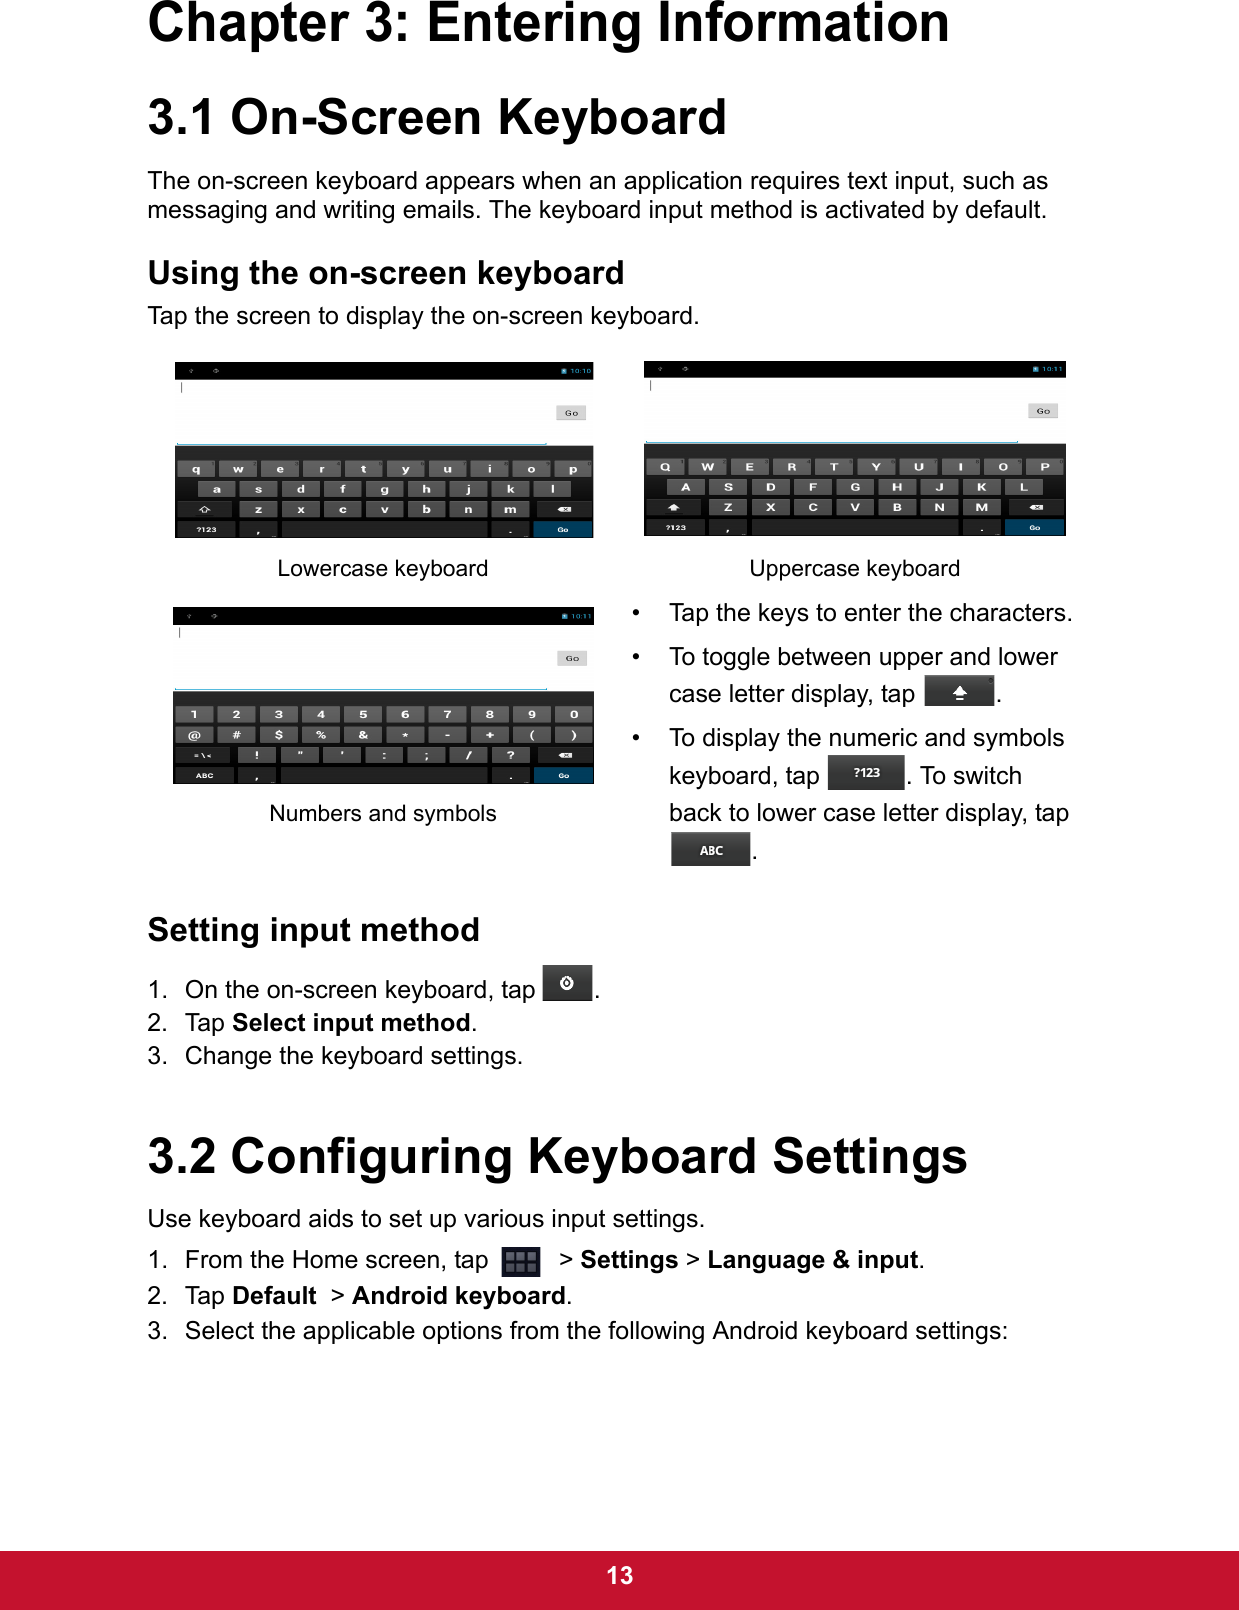  13Chapter 3: Entering Information3.1 On-Screen KeyboardThe on-screen keyboard appears when an application requires text input, such as messaging and writing emails. The keyboard input method is activated by default.Using the on-screen keyboardTap the screen to display the on-screen keyboard. Setting input method1. On the on-screen keyboard, tap  .2. Tap Select input method.3. Change the keyboard settings.3.2 Configuring Keyboard SettingsUse keyboard aids to set up various input settings. 1. From the Home screen, tap    &gt; Settings &gt; Language &amp; input.2. Tap Default  &gt; Android keyboard.3. Select the applicable options from the following Android keyboard settings:Lowercase keyboard Uppercase keyboard• Tap the keys to enter the characters.• To toggle between upper and lower case letter display, tap  .• To display the numeric and symbols keyboard, tap  . To switch back to lower case letter display, tap .Numbers and symbols